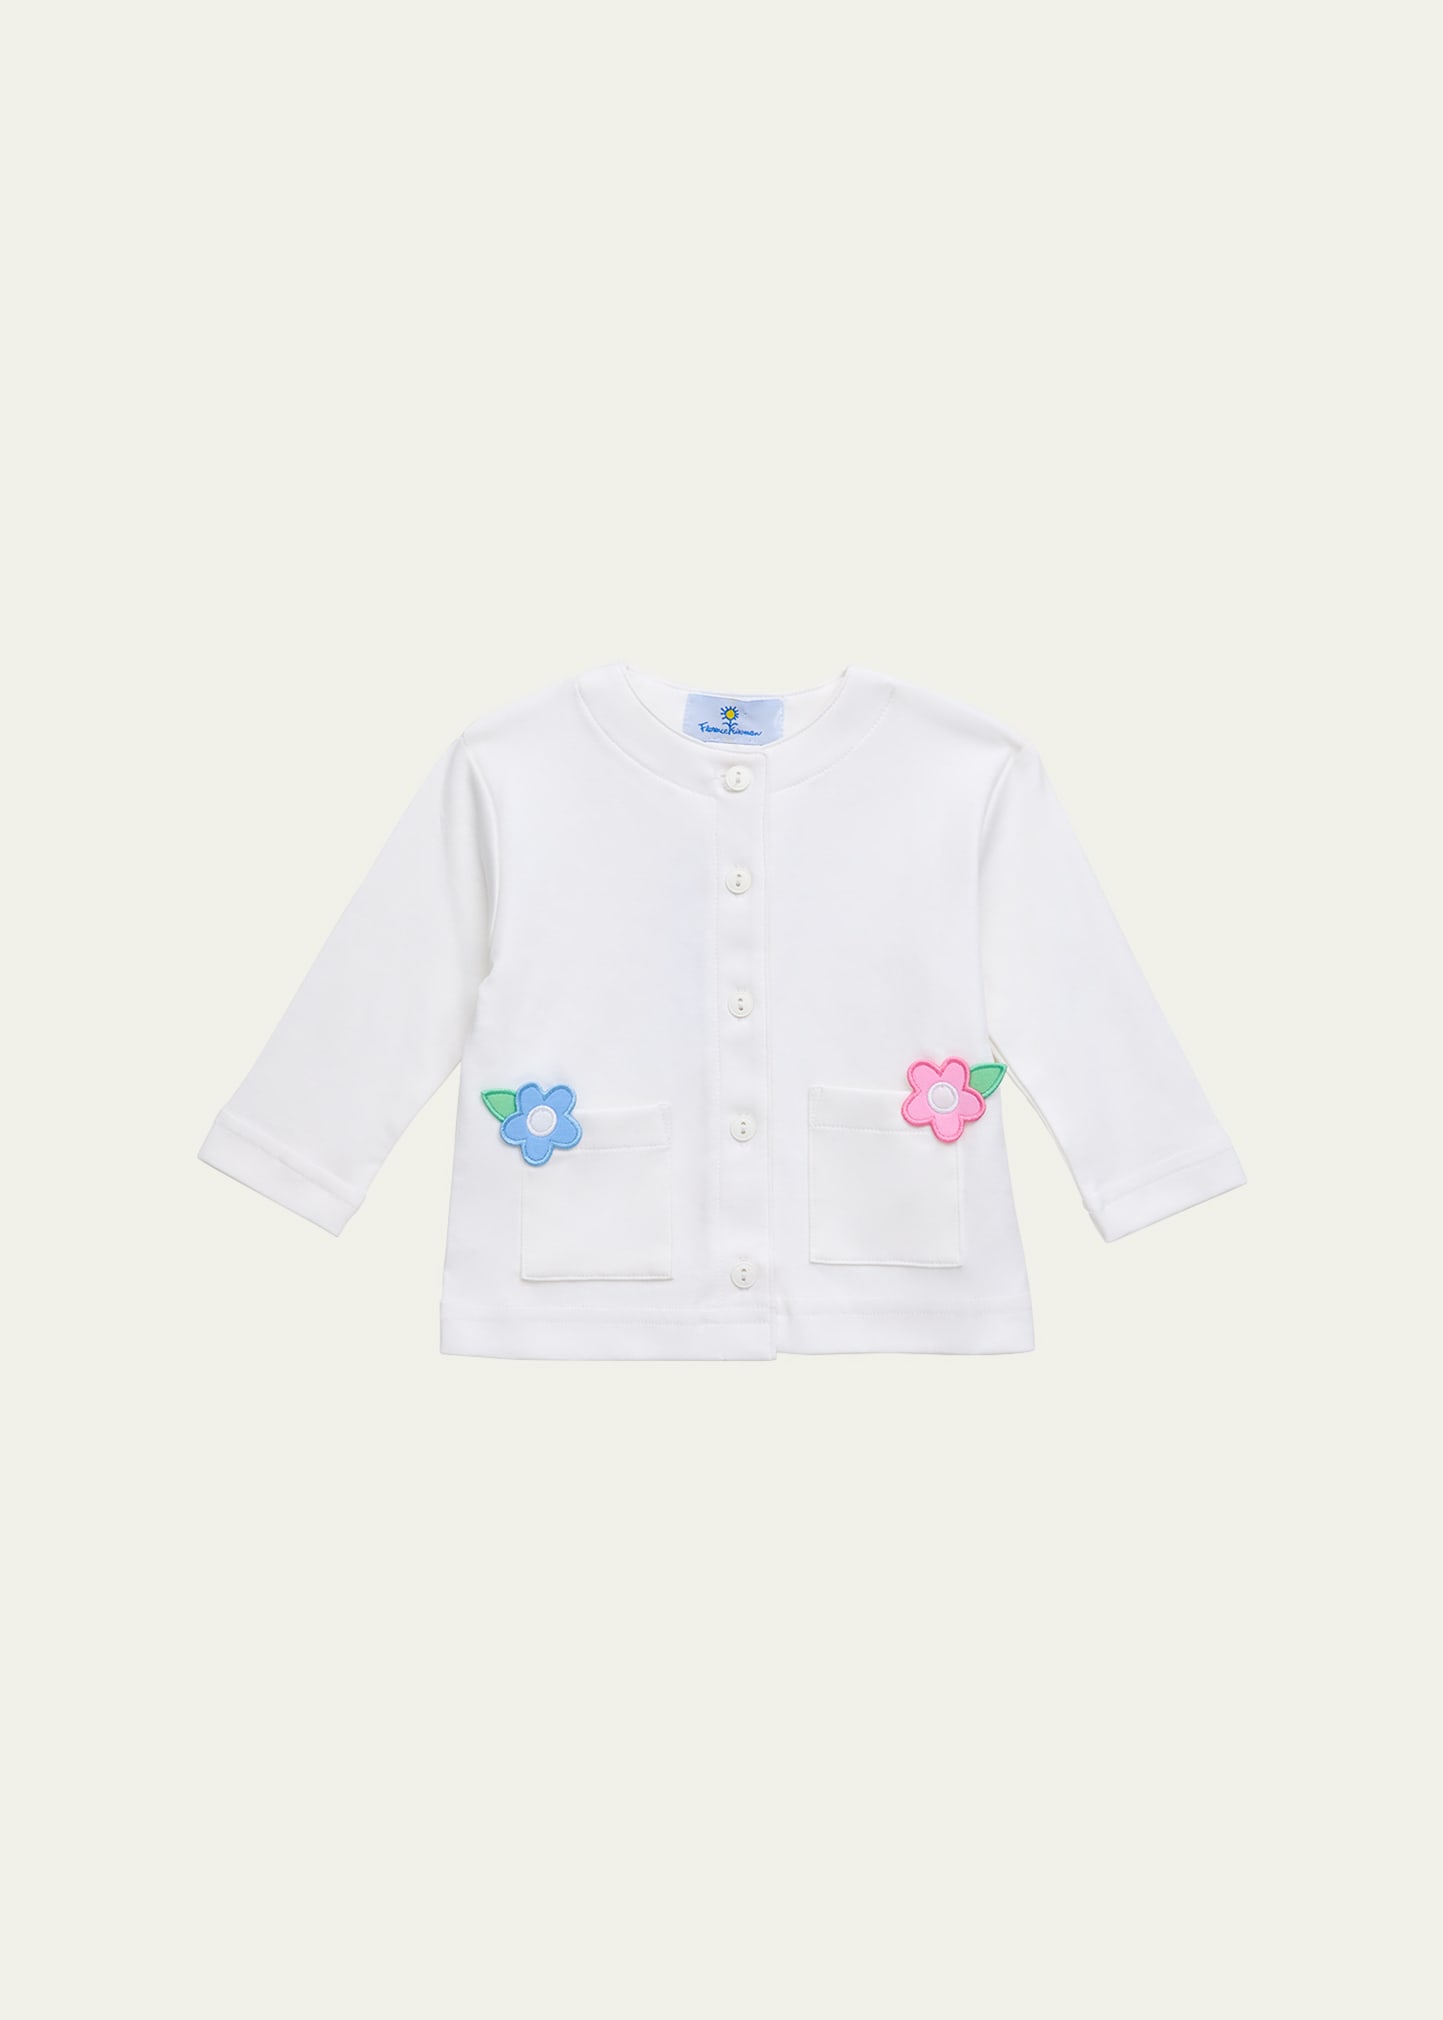 Florence Eiseman Kids' Girl's White Knit Cardigan With Flowers